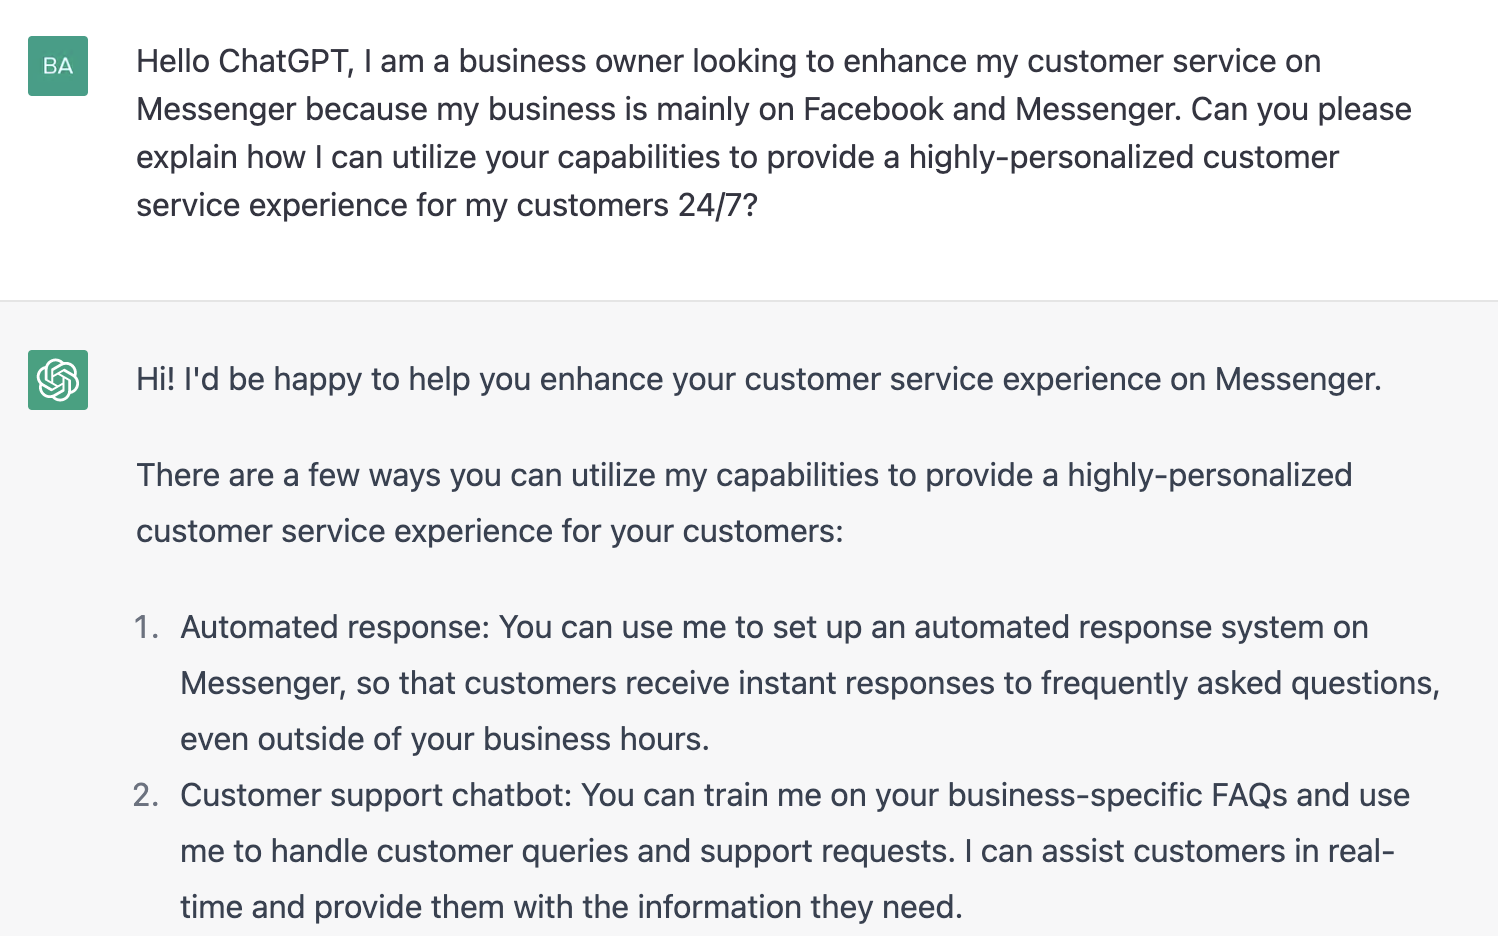 ChatGPT prompt about providing a highly personalized customer service